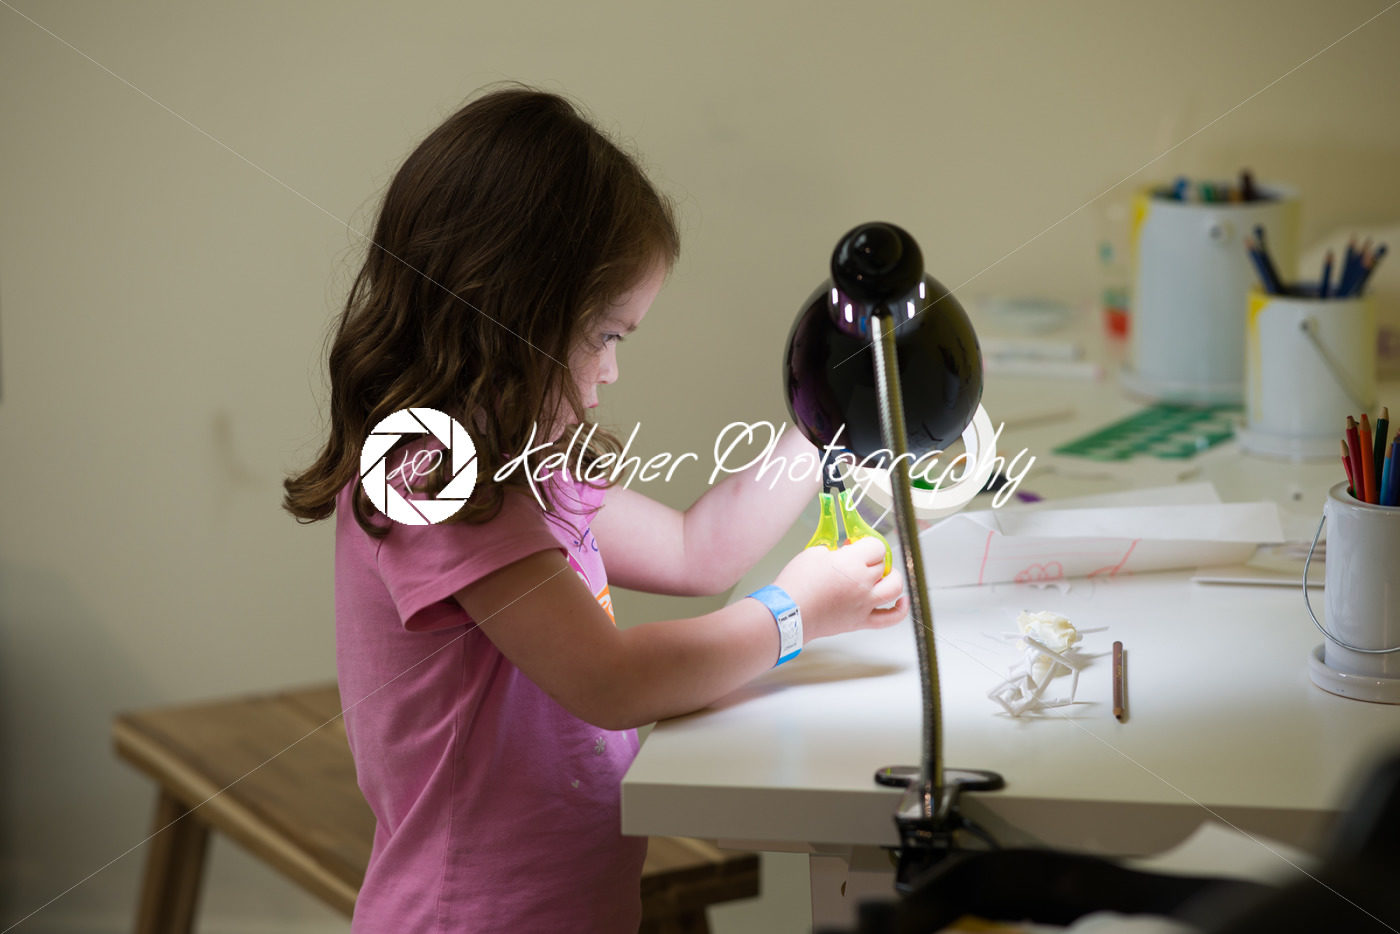 Young girl cutting tape at desk - Kelleher Photography Store